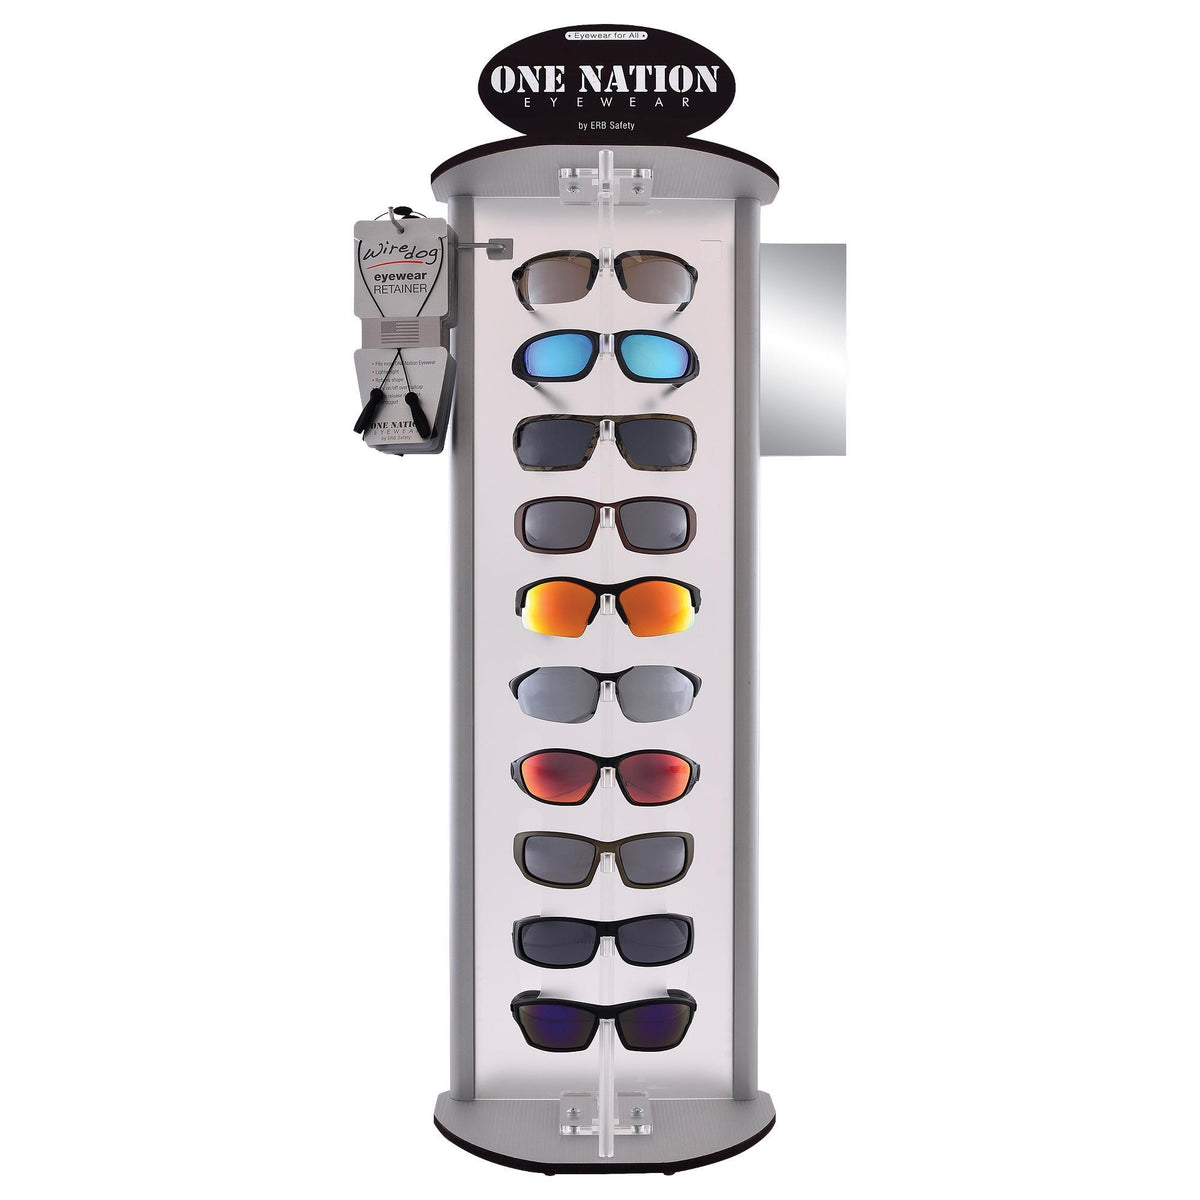 ONE Nation® Display Kit (includes Display and 60 pair of Retail Ready Safety Glasses)